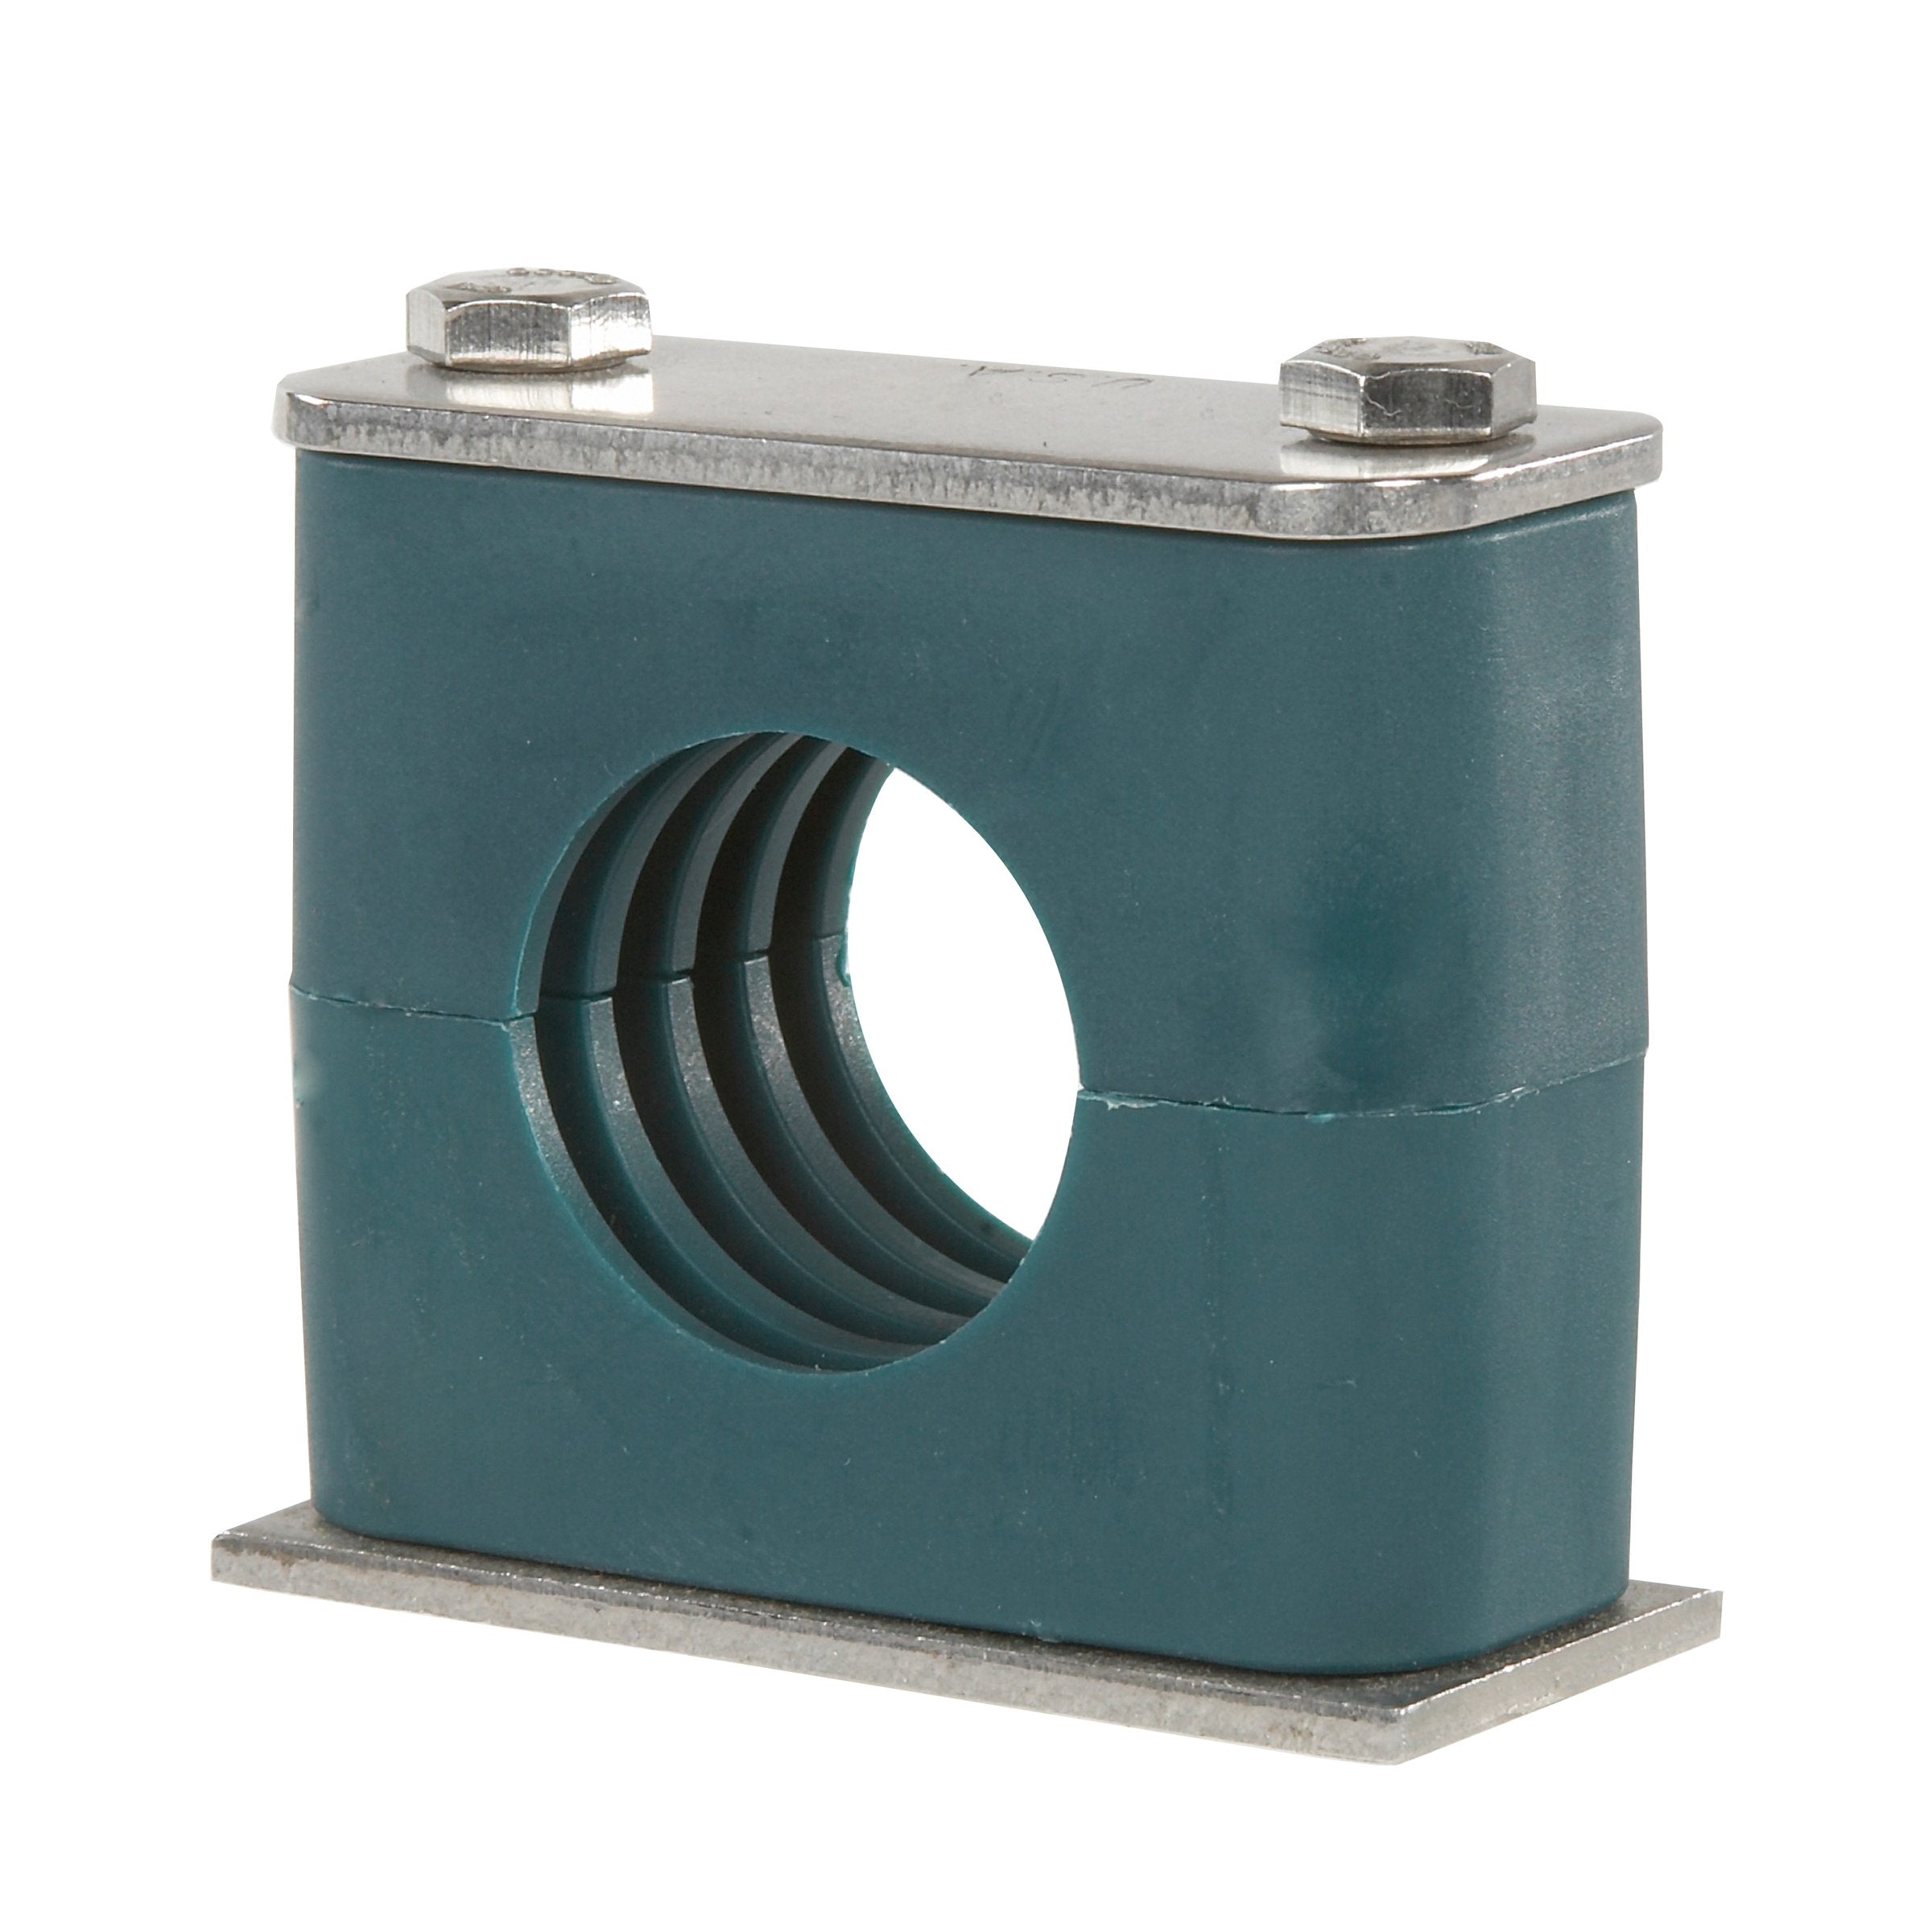 SP-319-PP-DP-AS-U-W10 : Stauff Clamp, Single Weld Plate, 0.75 inch (19mm) OD, for 3/4" Tube, Green PP Insert, Profiled Interior, Carbon Steel